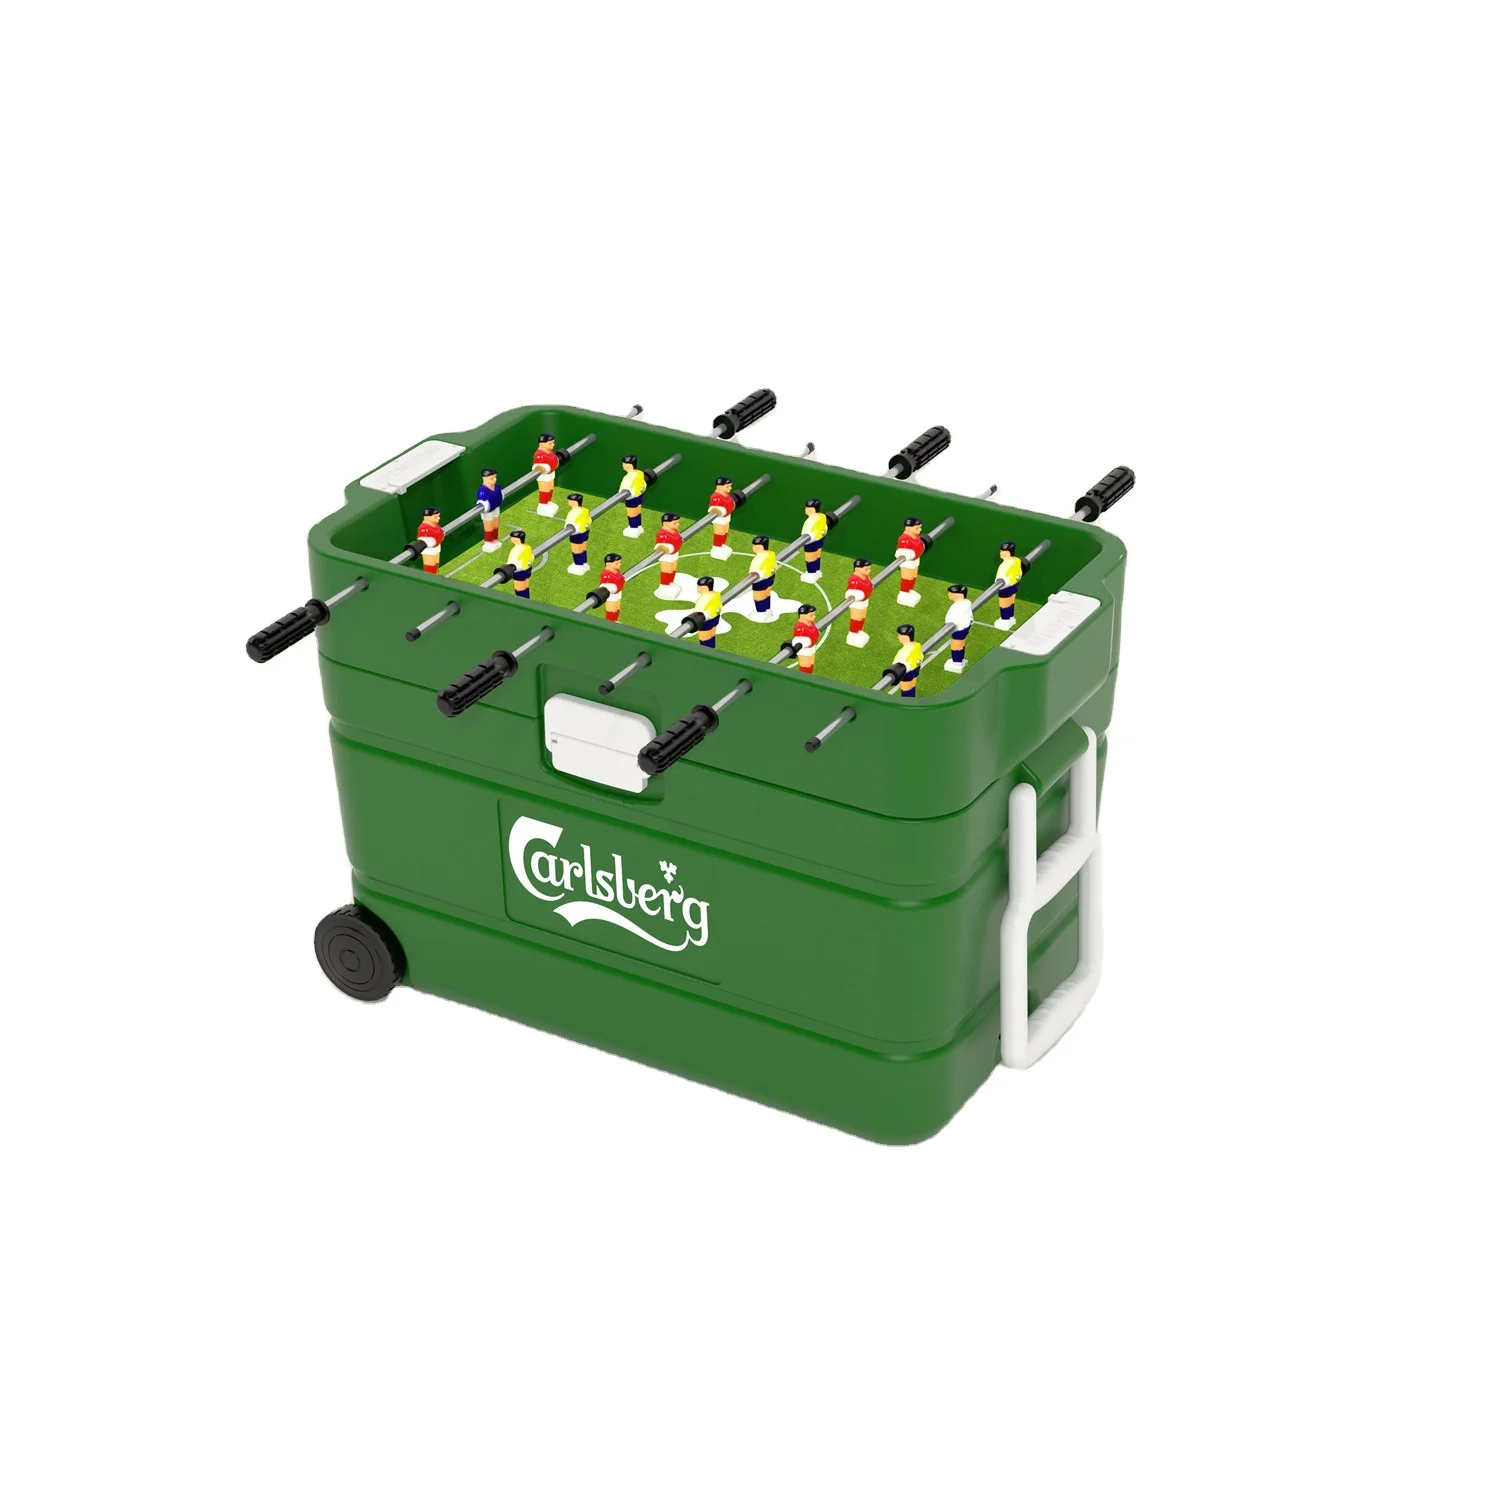 

100% Eco-friendly Wheeled cooler box with football table game ideal for camping trips, tailgating parties, and picnics, Black